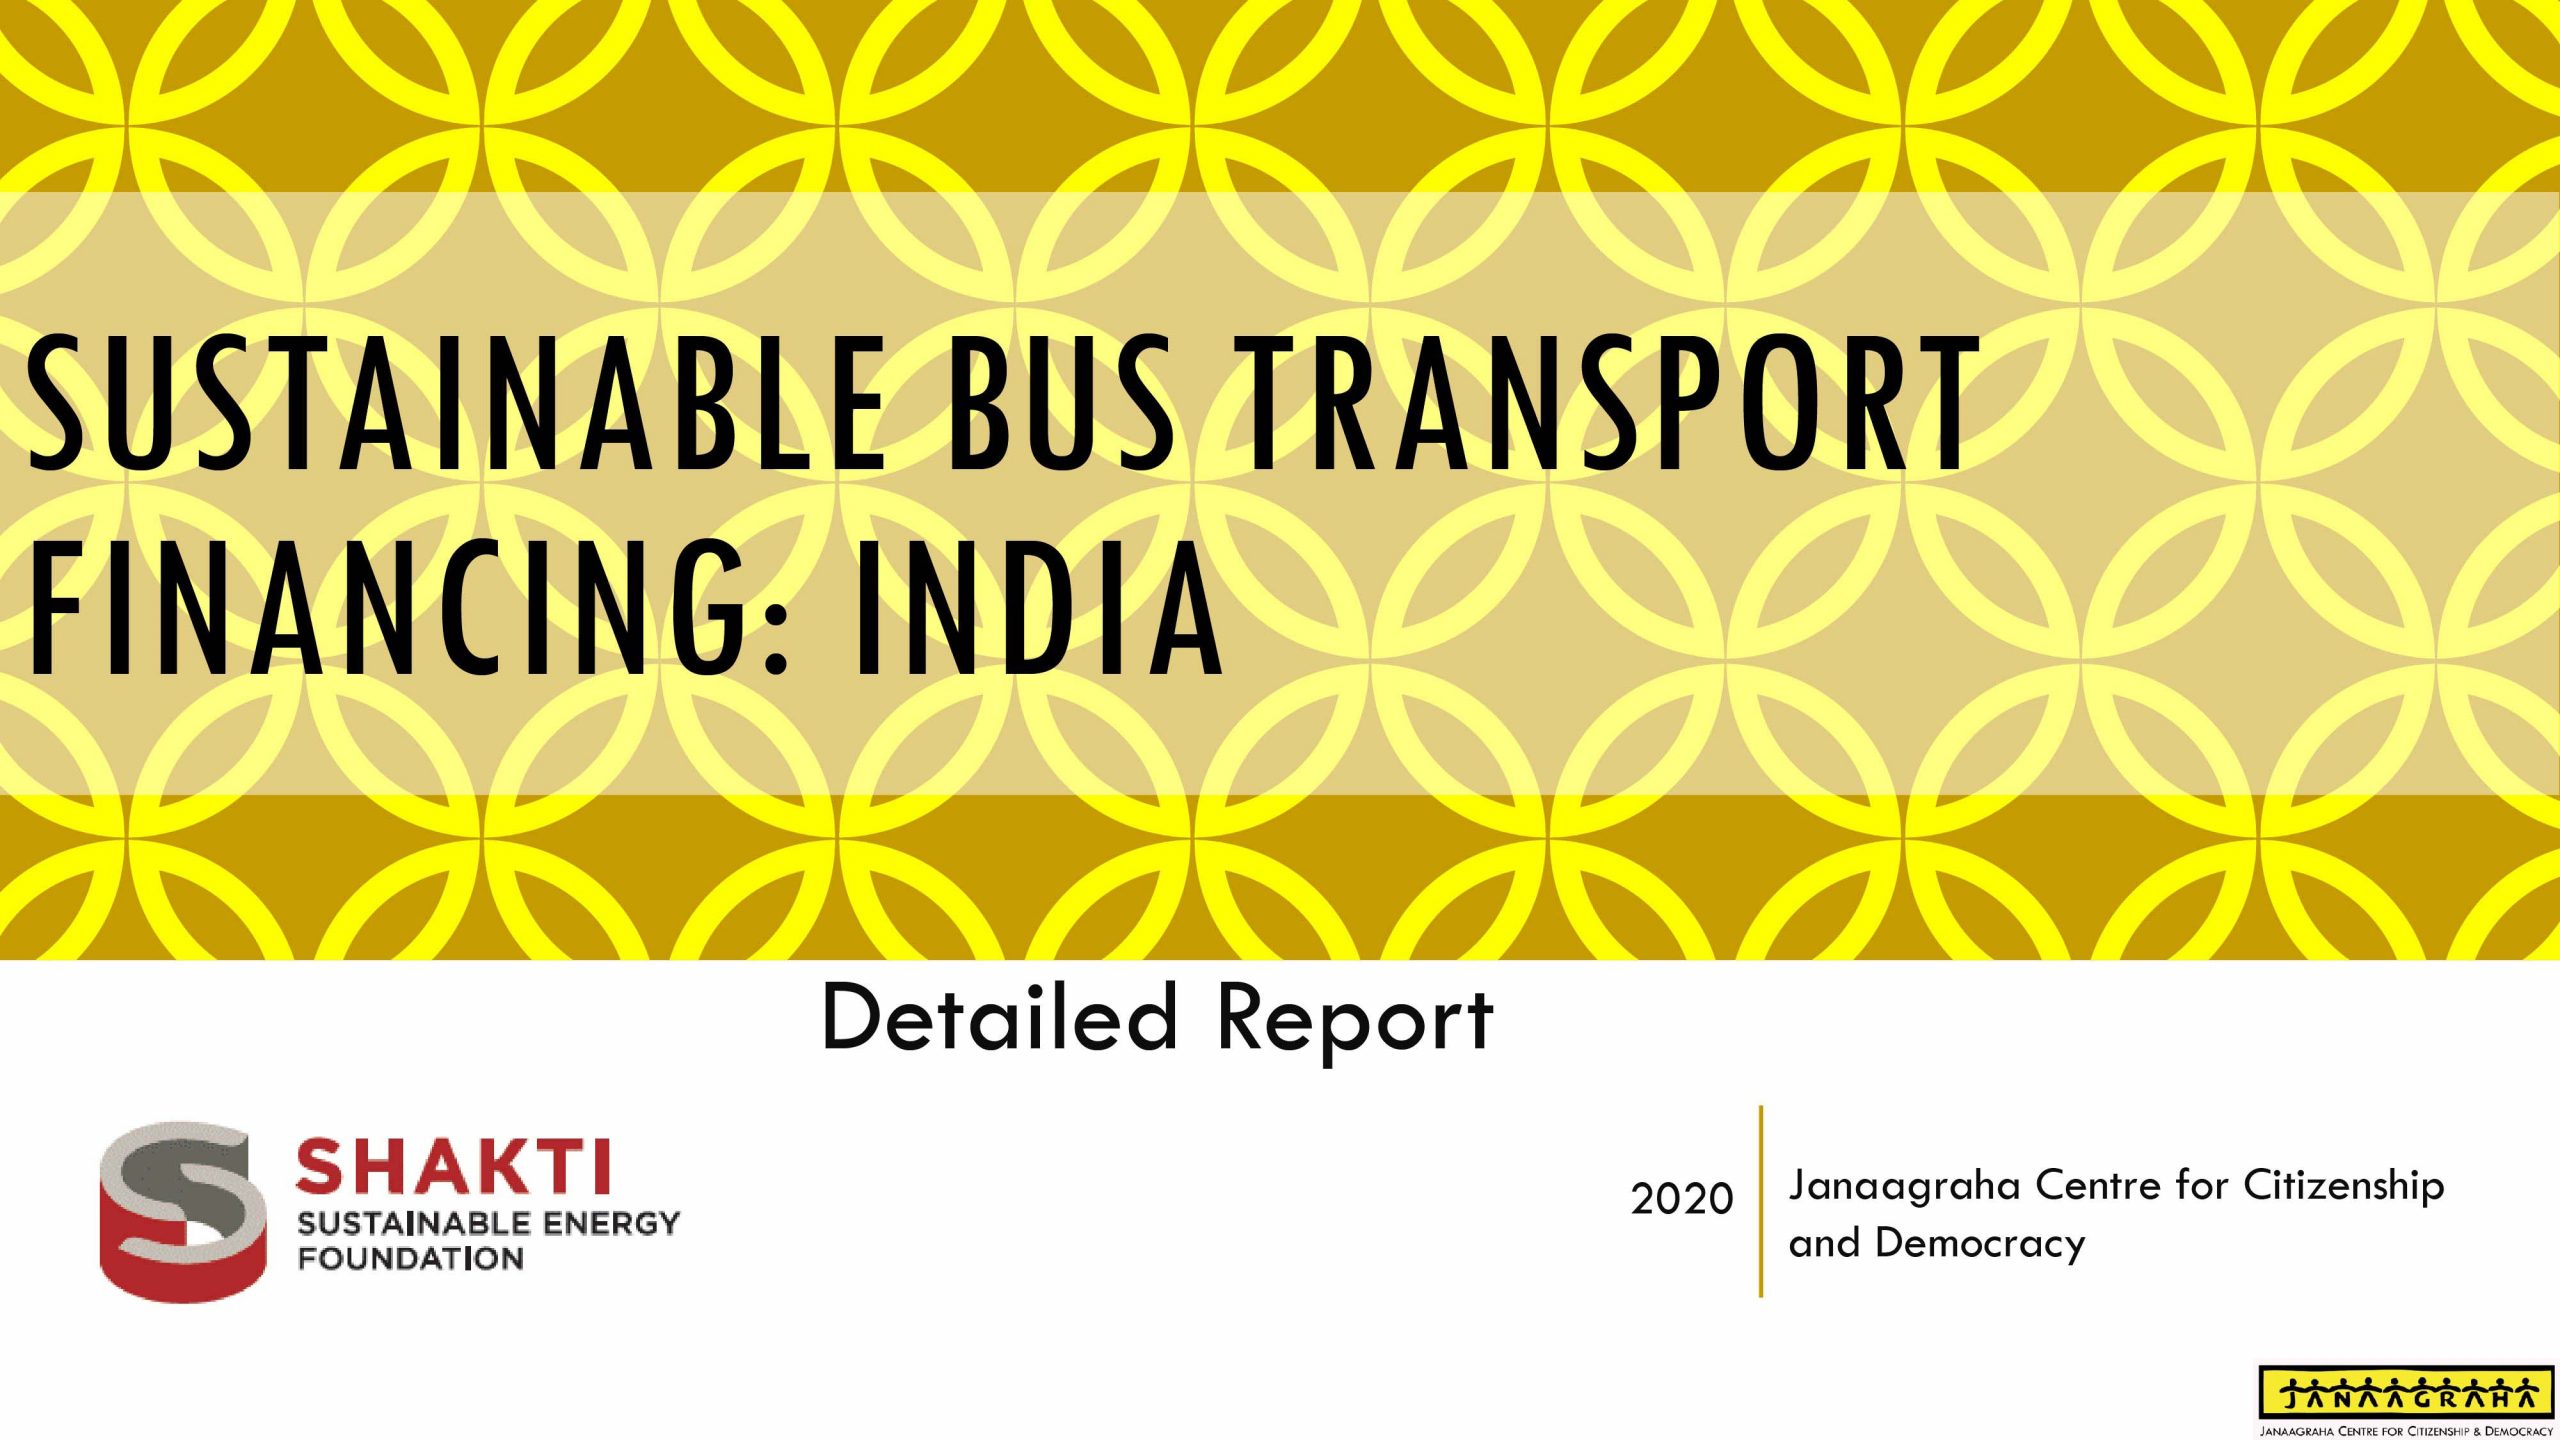 Sustainable bus transport financing: India